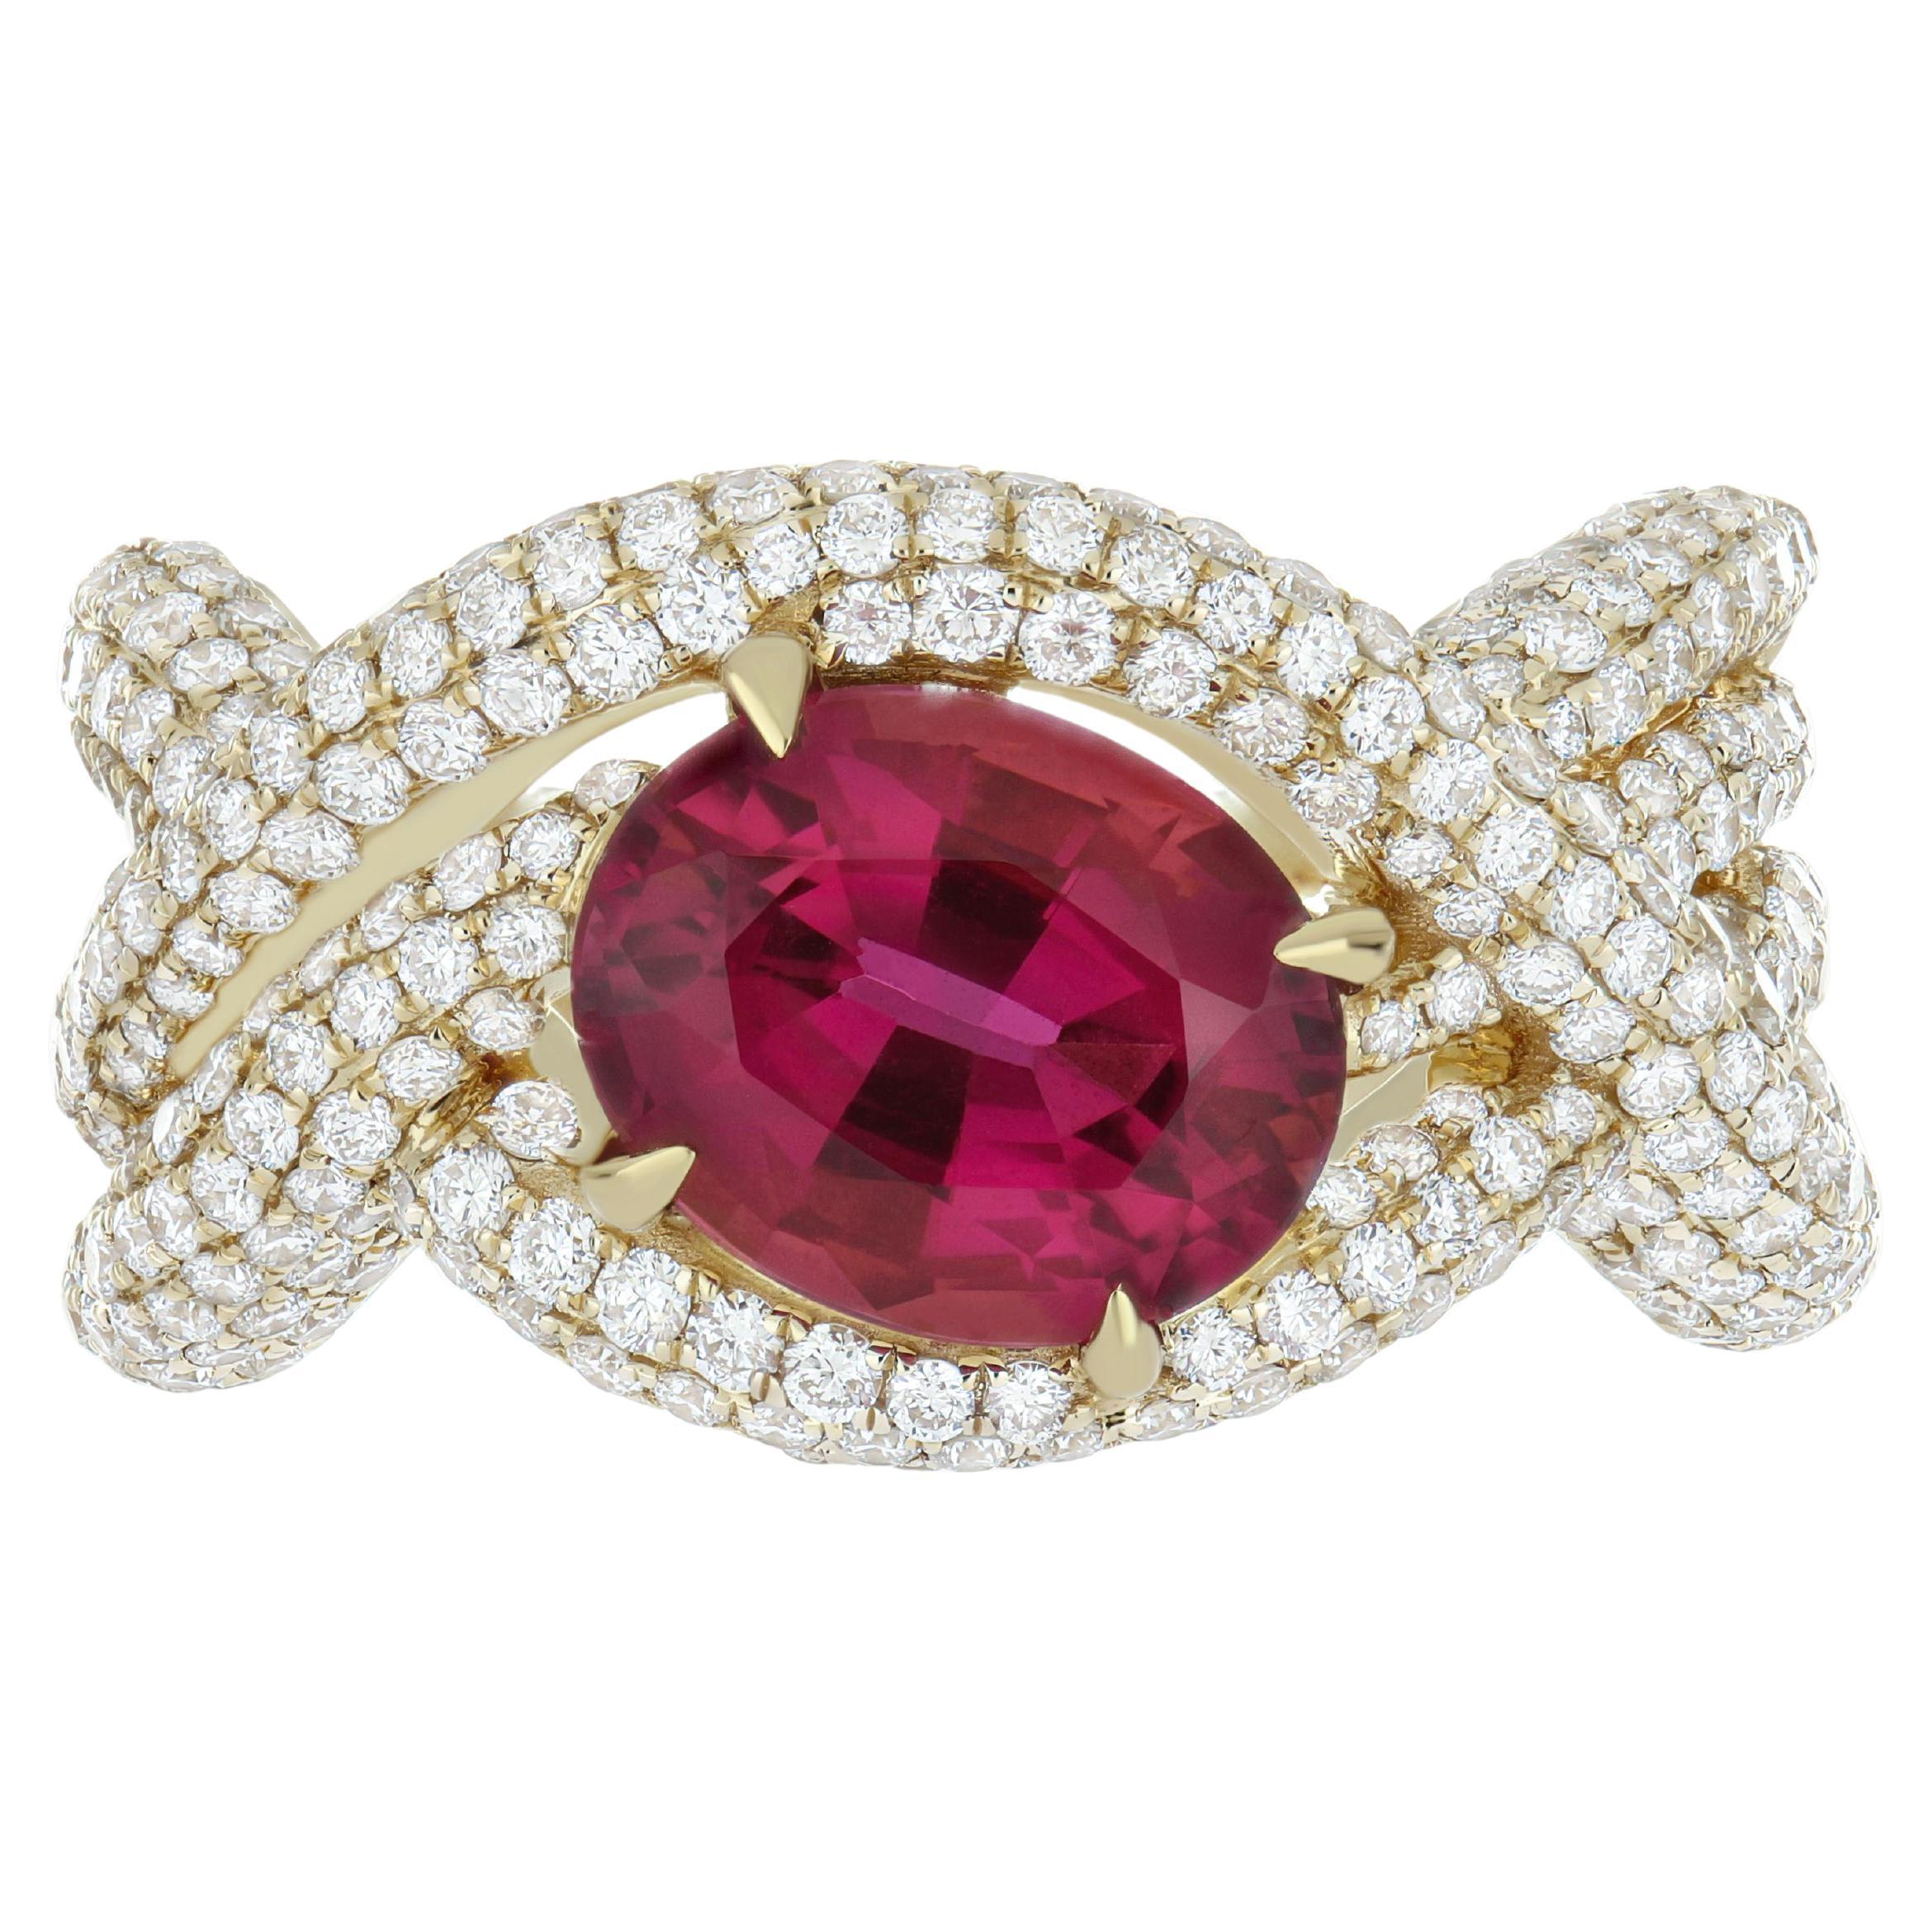 2.85 CT's Rubellite & Diamond Ring in 18 karat Yellow Gold Hand-crafted Ring For Sale